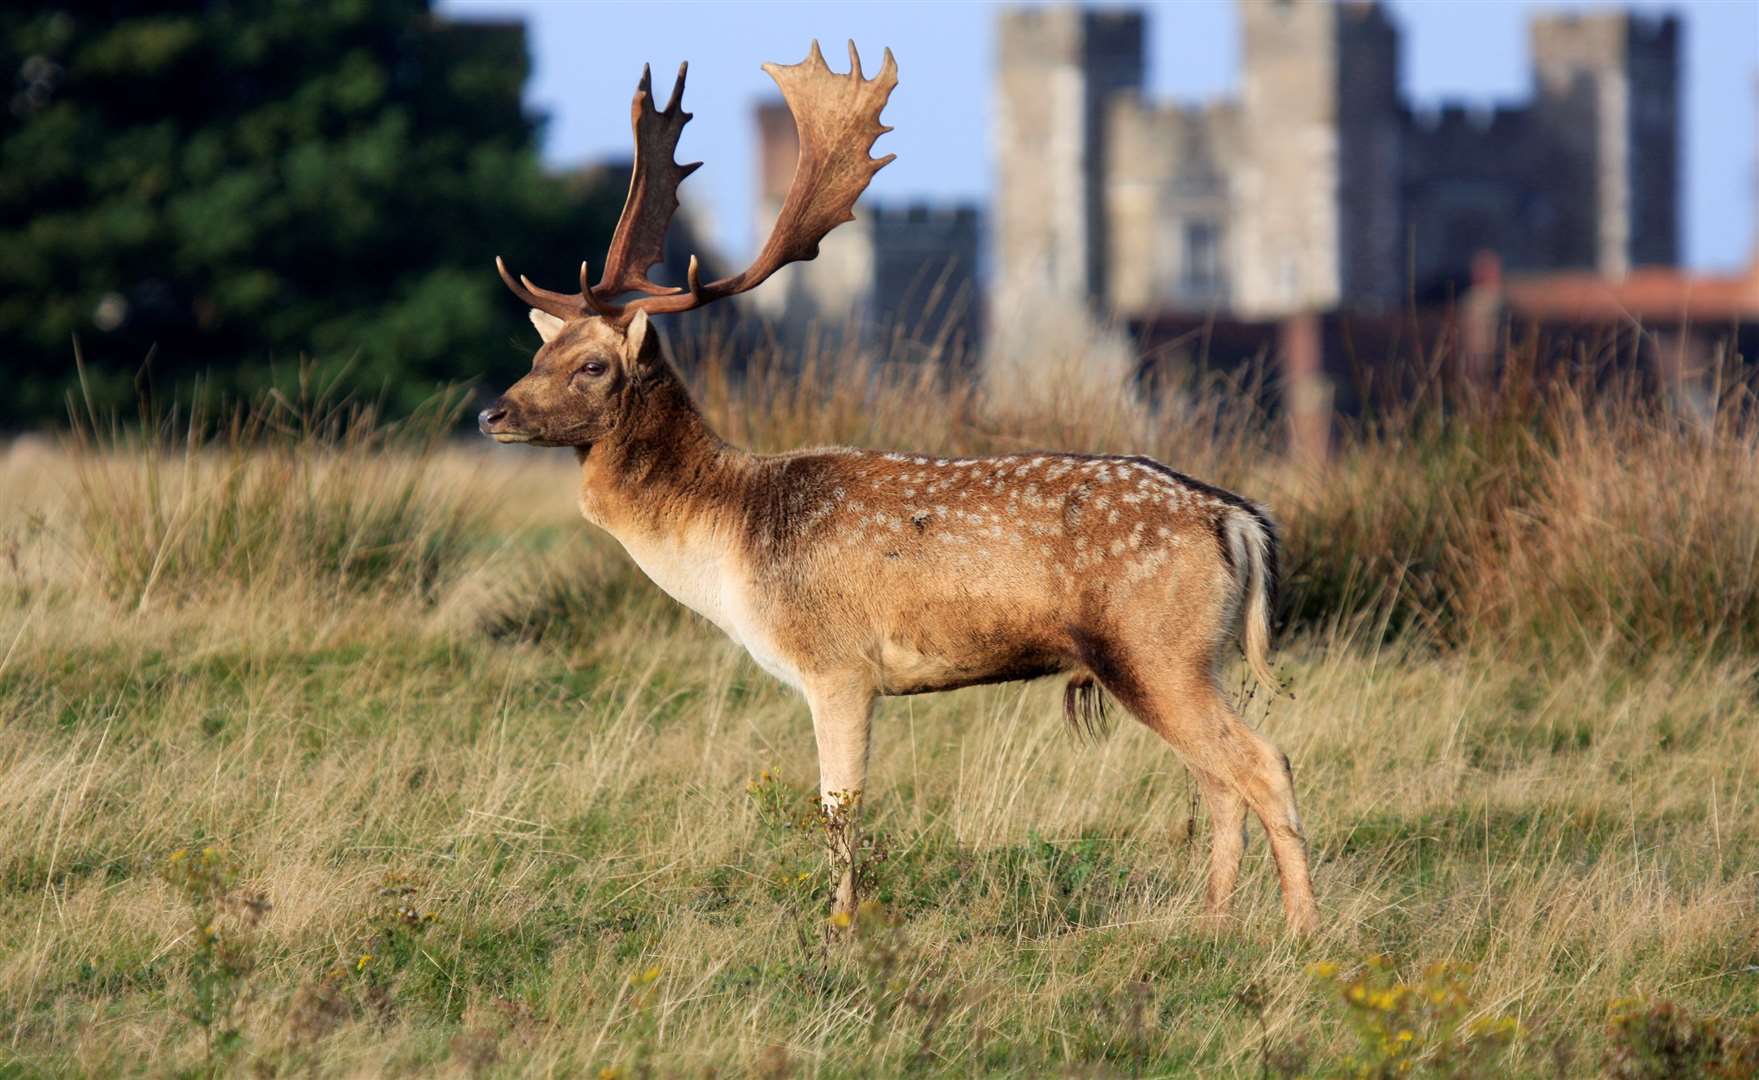 Come face-to-face with deer as you pass through National Trust estate Knole on this 17km run. Picture: Moonstone Images